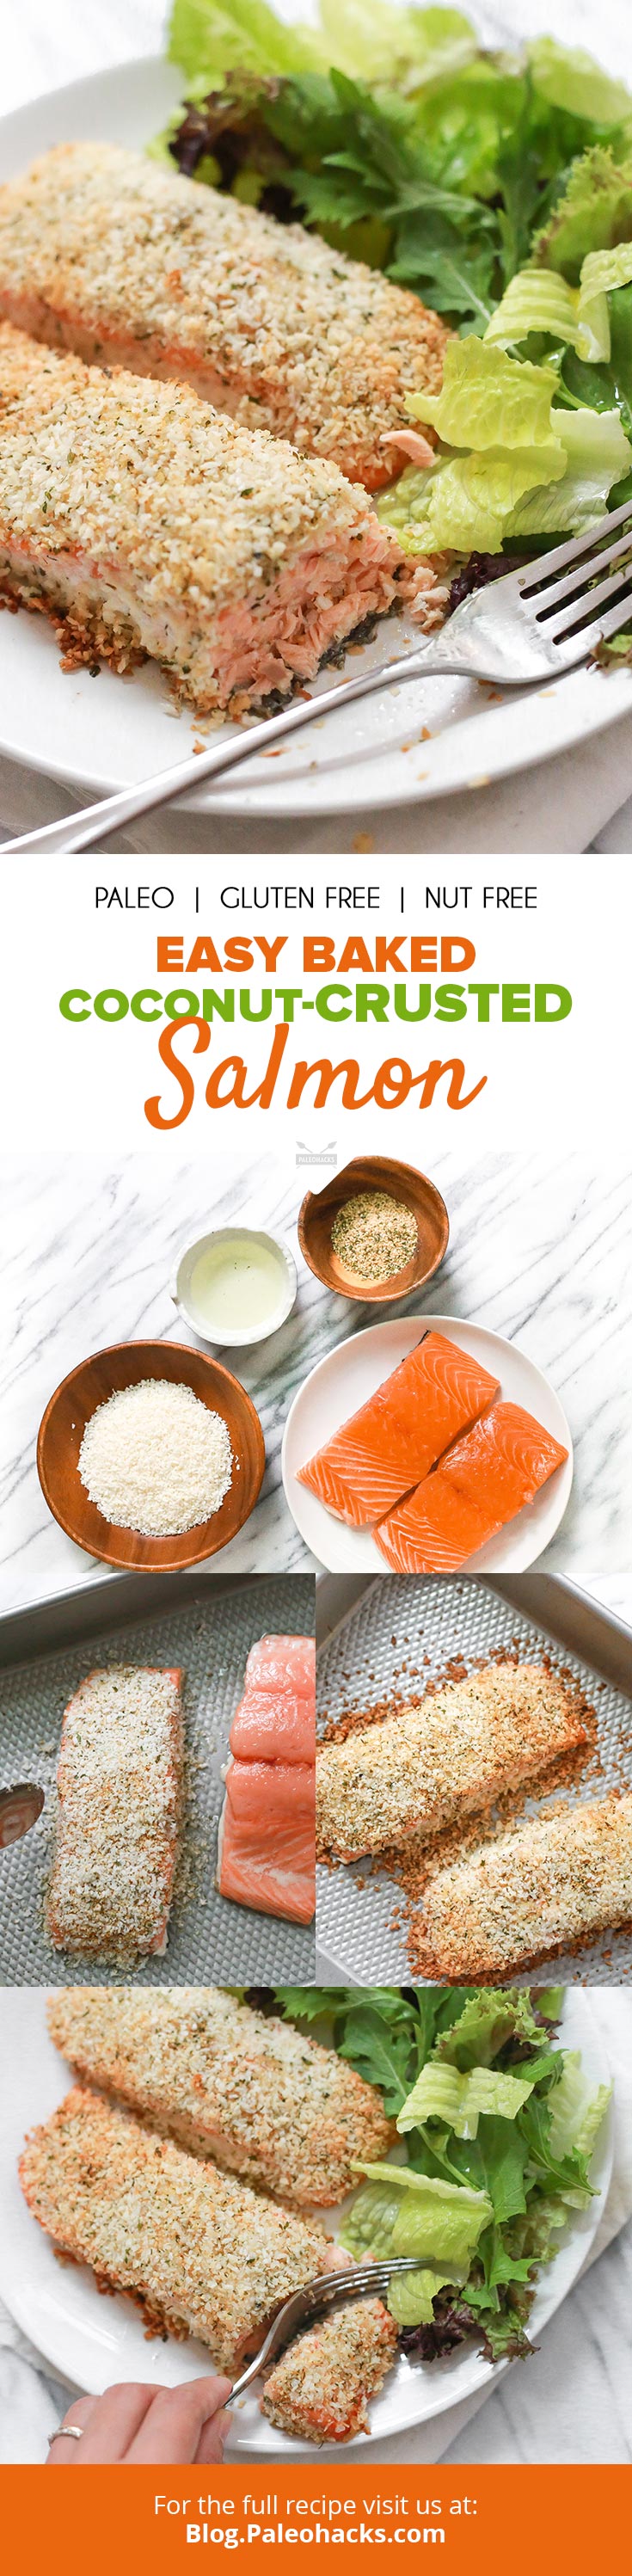 If you’re bored of ho-hum grilled salmon, this baked coconut-crusted salmon is just what your taste buds are craving. Great for busy weeknight dinners!